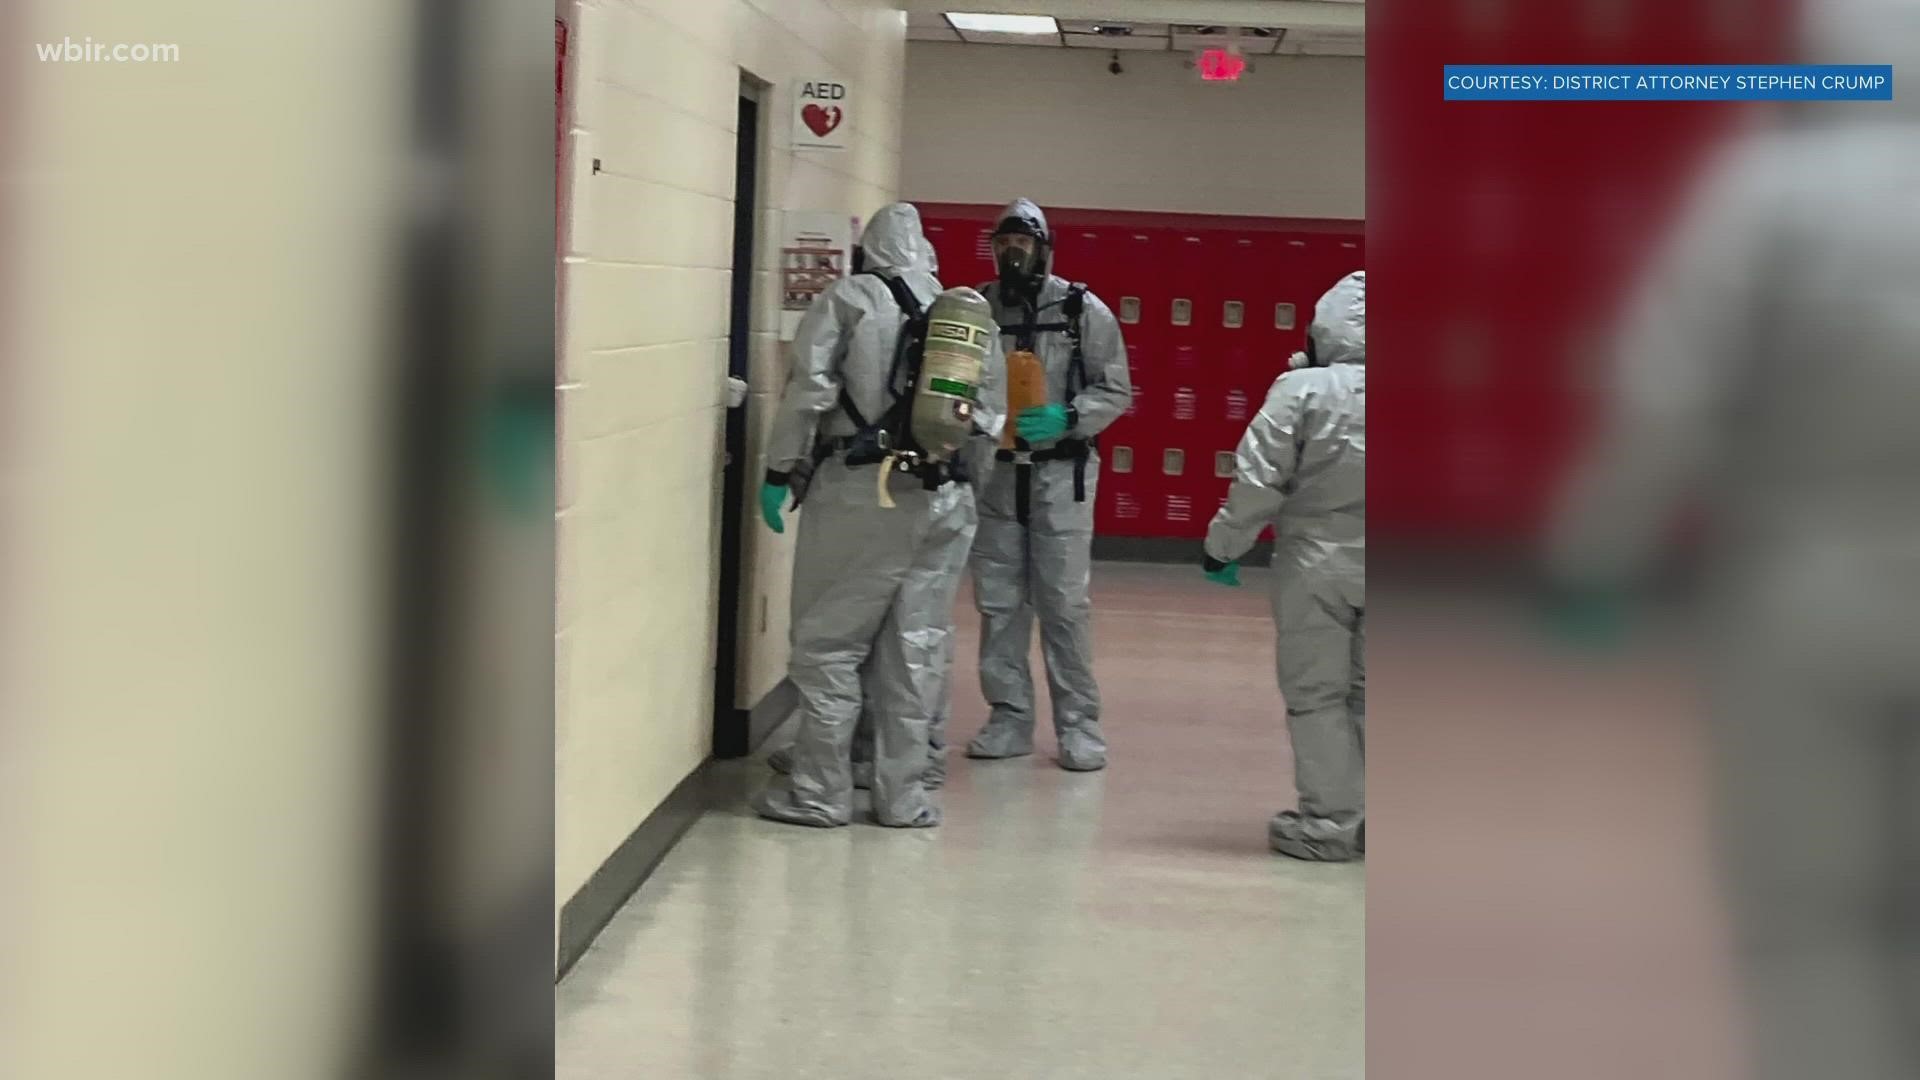 911 calls obtained by 10News show rising concerns after school personnel at a Monroe County high school were exposed this week to fentanyl.